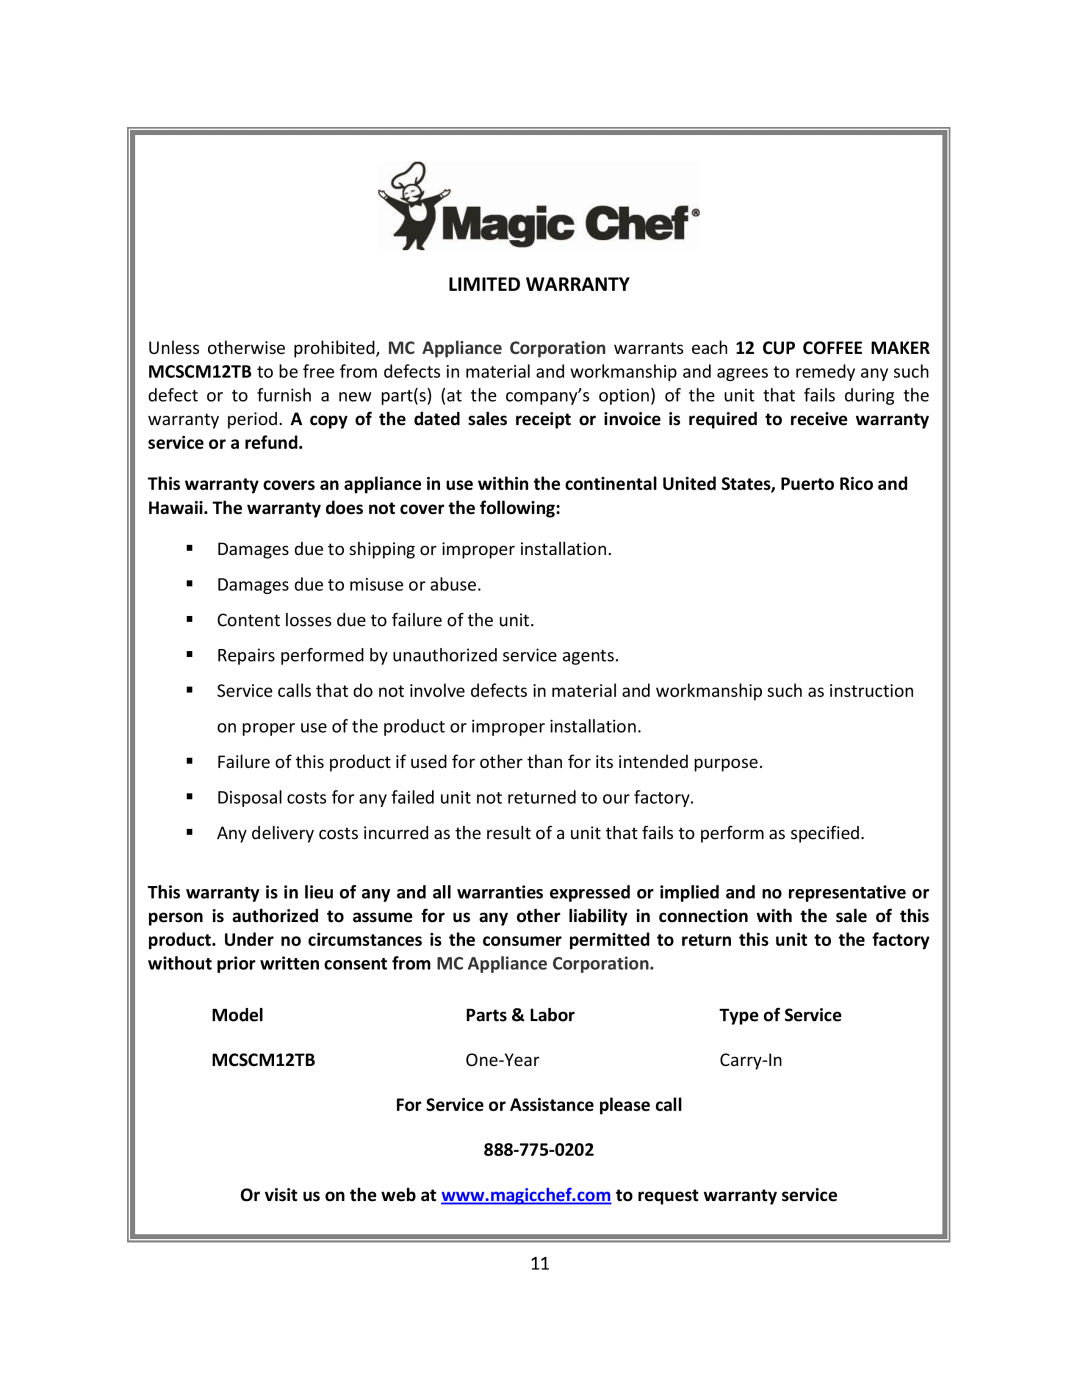 Magic Chef MCSCM12TB instruction manual Model, Parts & Labor, One-Year, Carry-In 